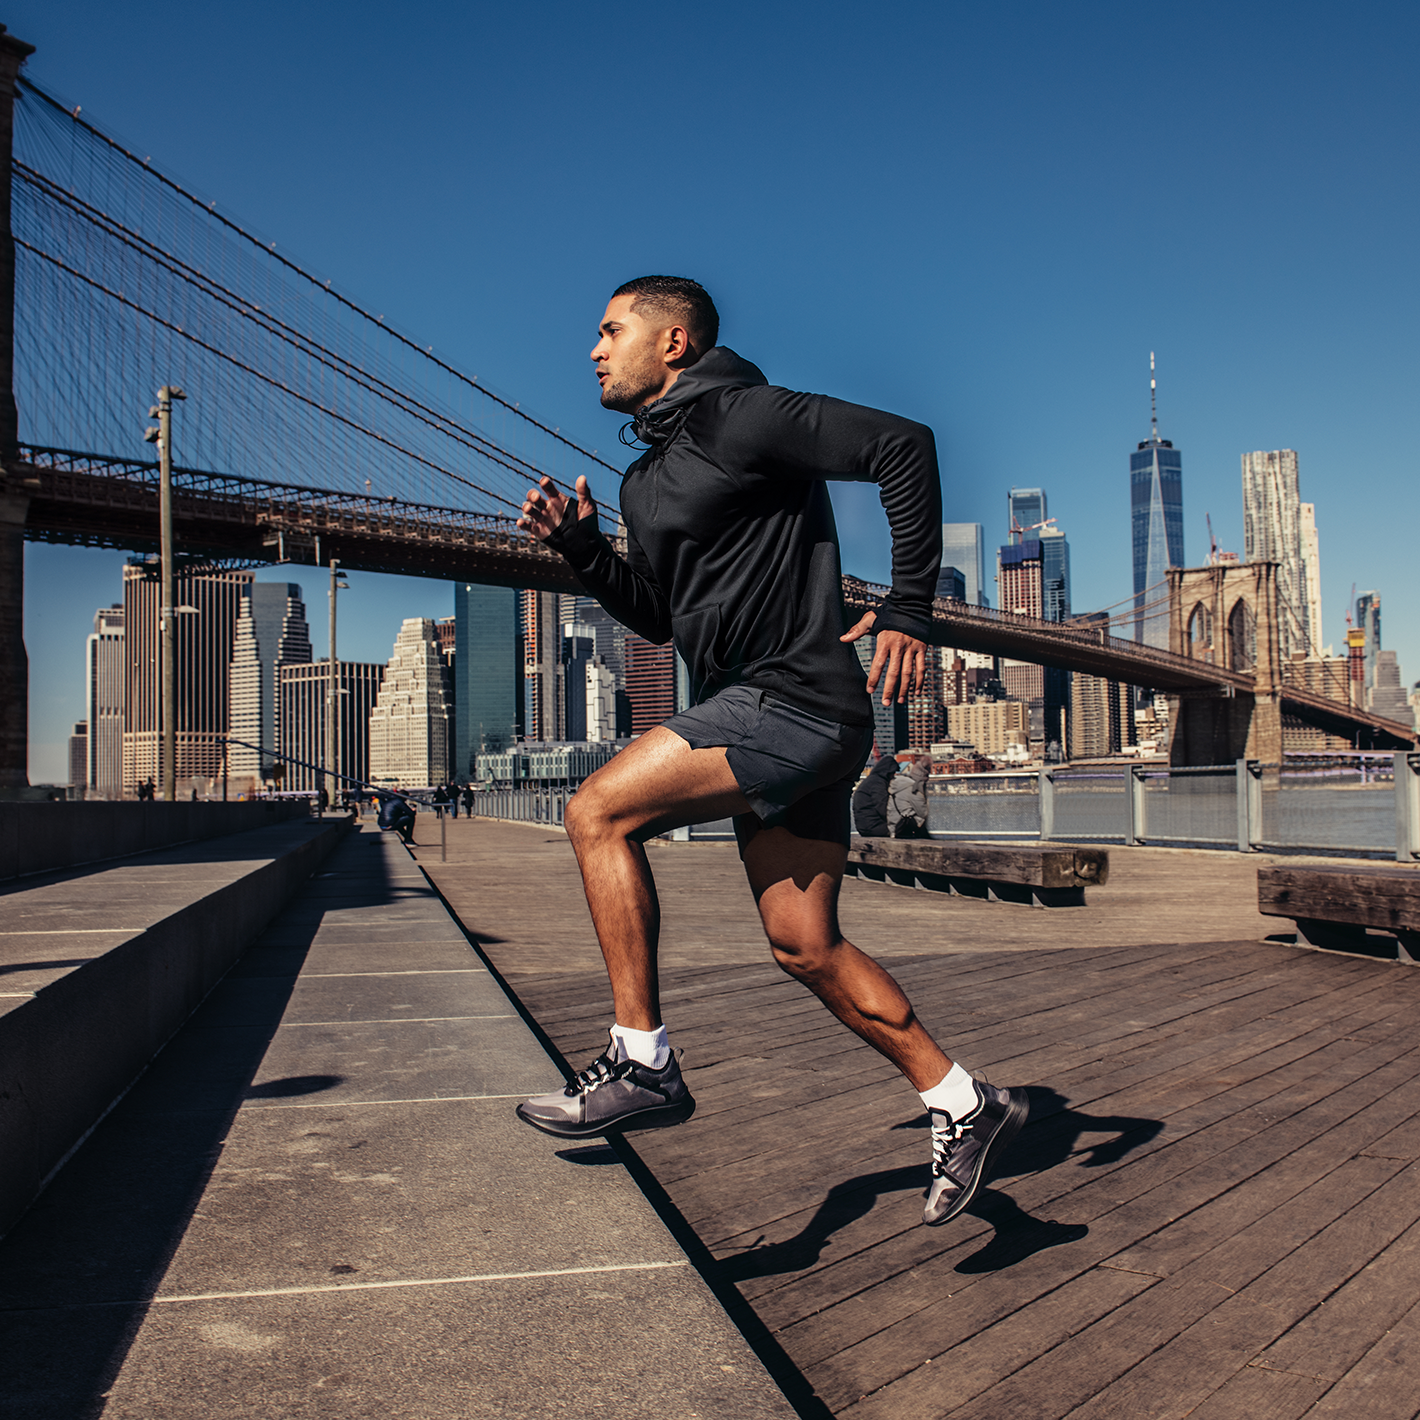 A man running on some stairs with the New York City skyline in the background.